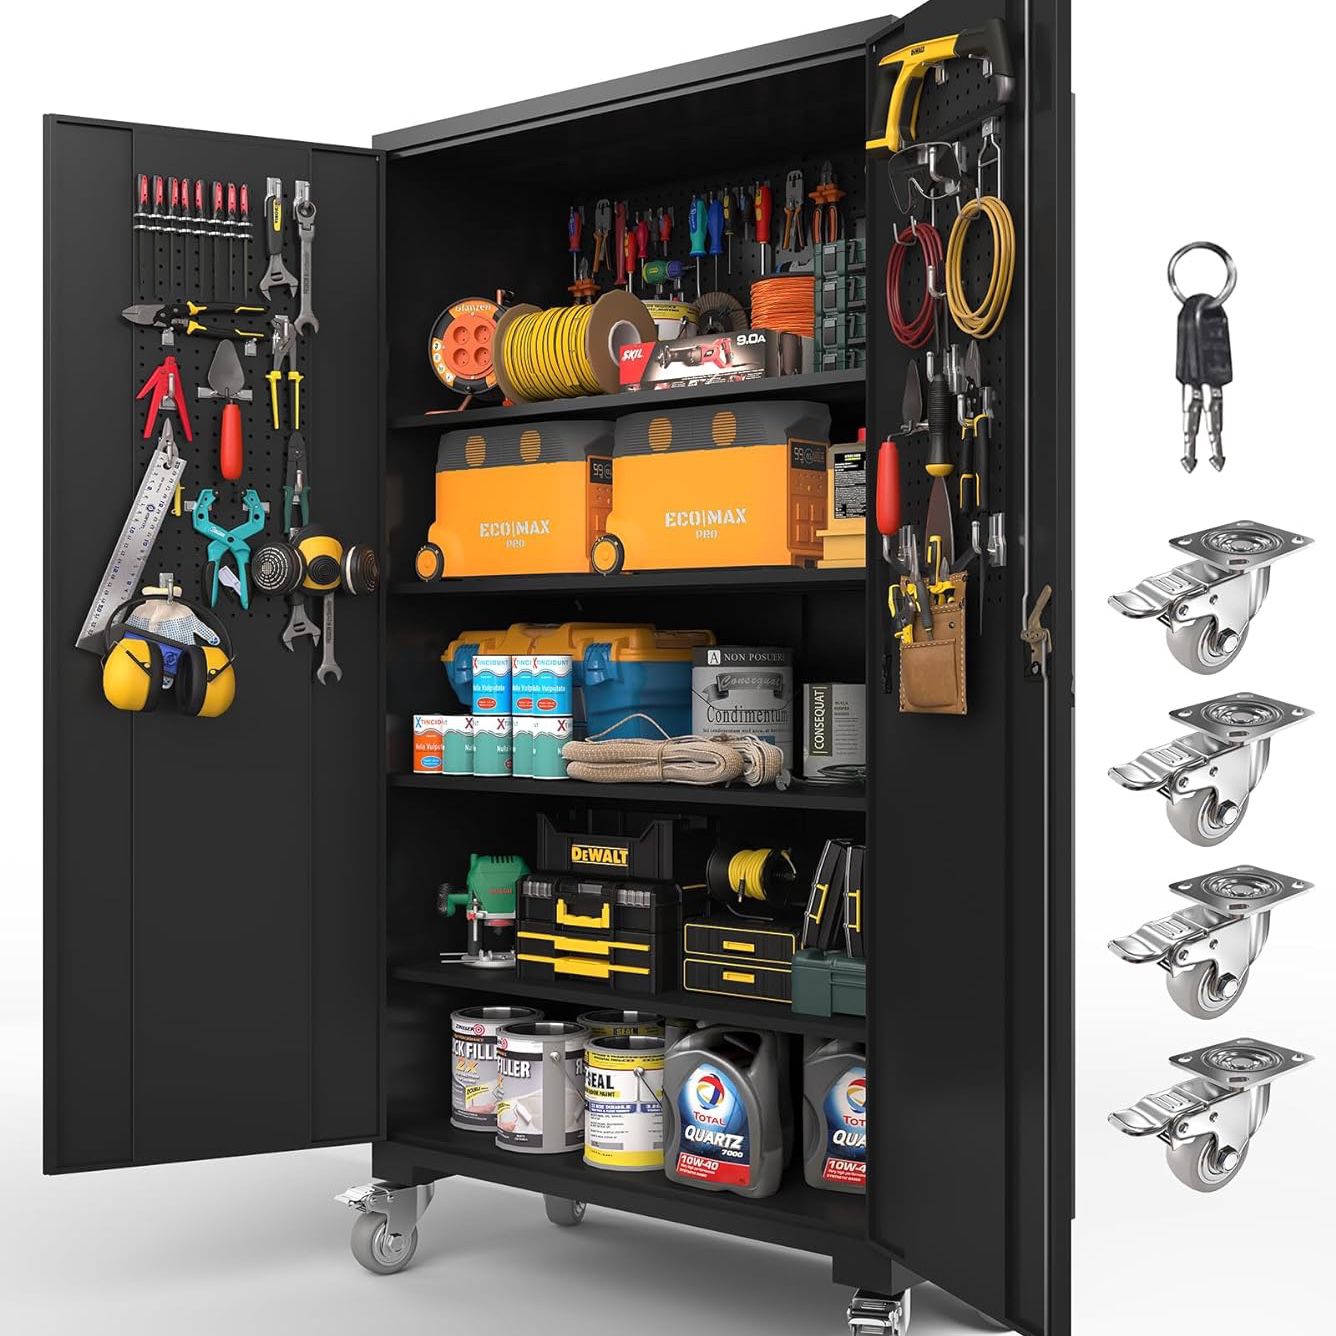 Tall & Wide Metal Storage Cabinet with Doors & 4 Adjustable Shelves | Heavy-Duty Black Lockable Garage Cabinet with Wheels & Pegboard for Office, Gym,